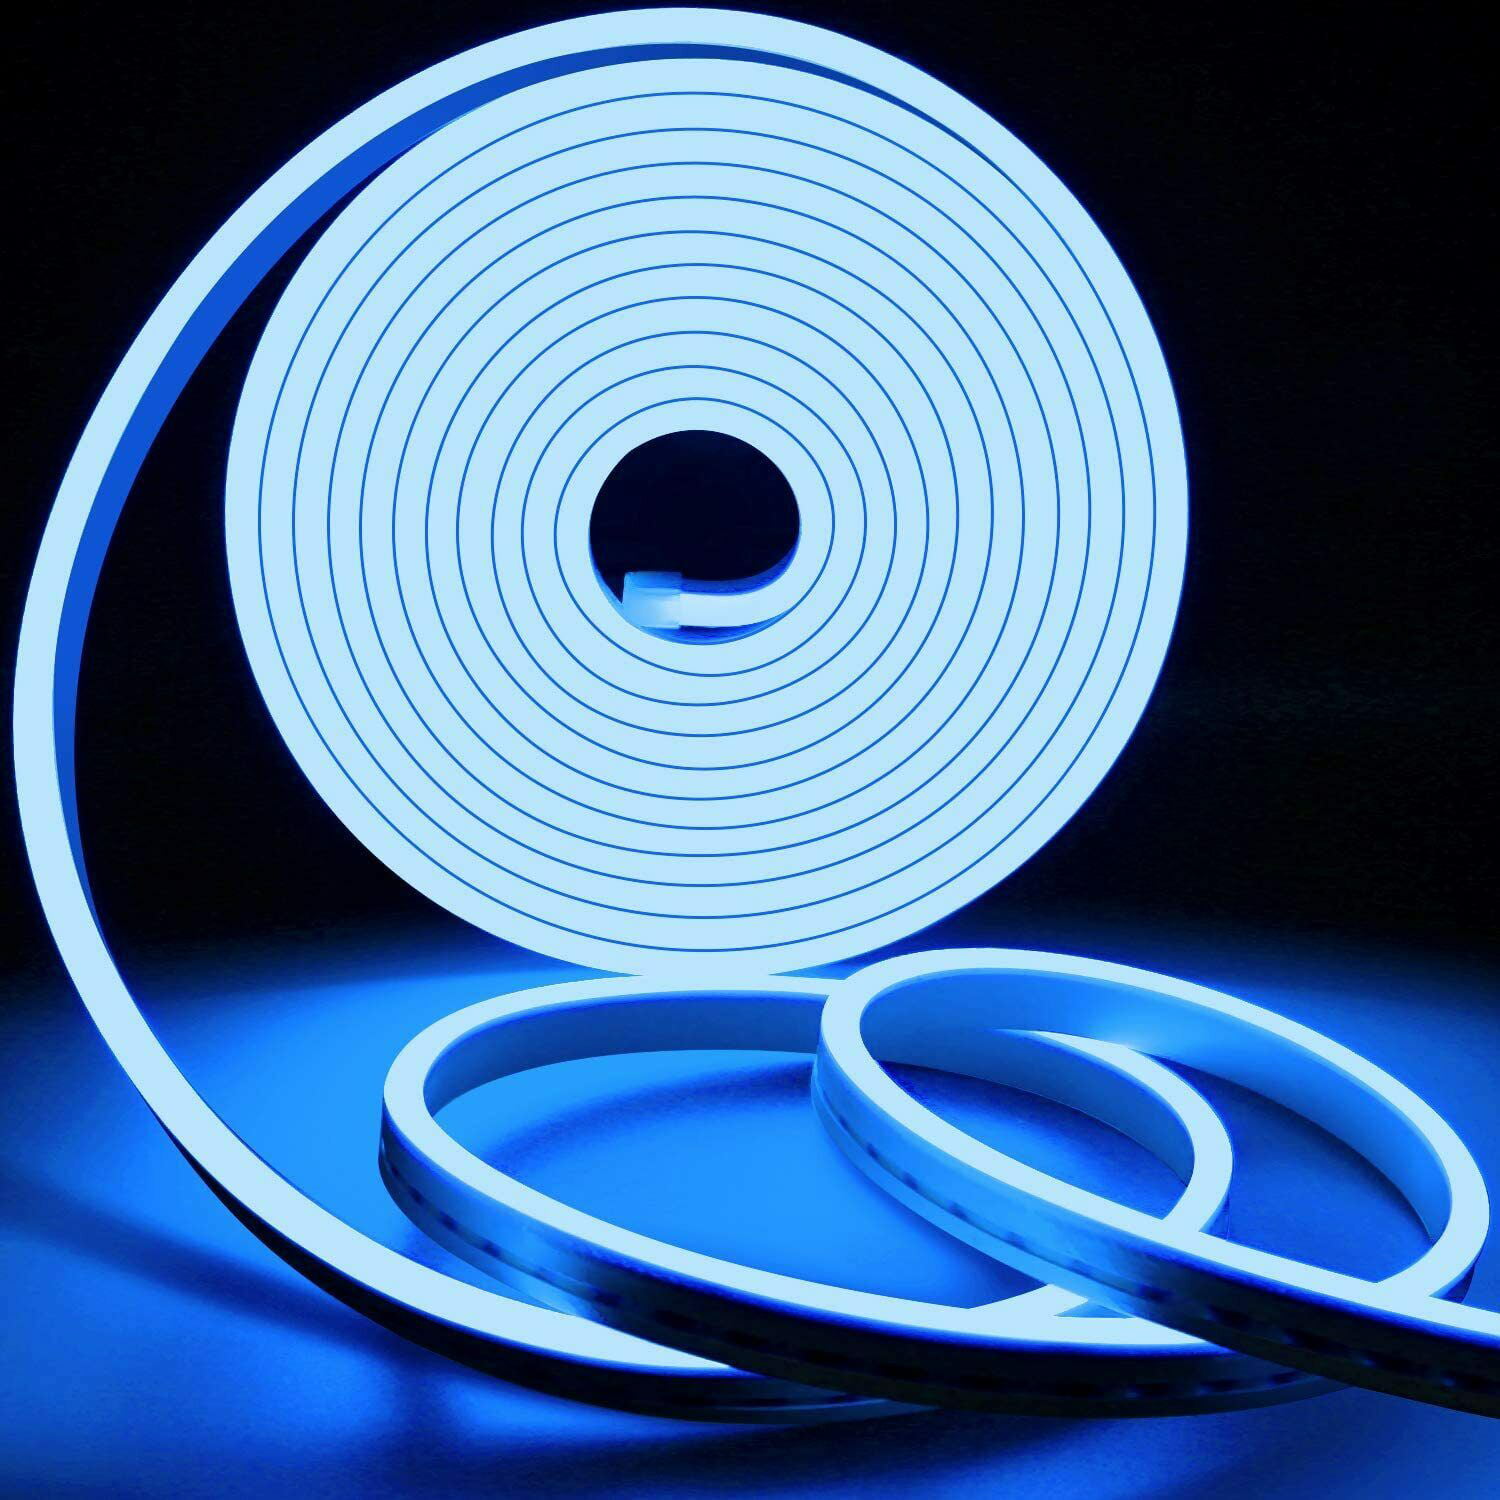 Details about   12V Flexible LED Strip Waterproof Sign Neon Lights Silicone Tube 1M 2M 3M 5M USA 